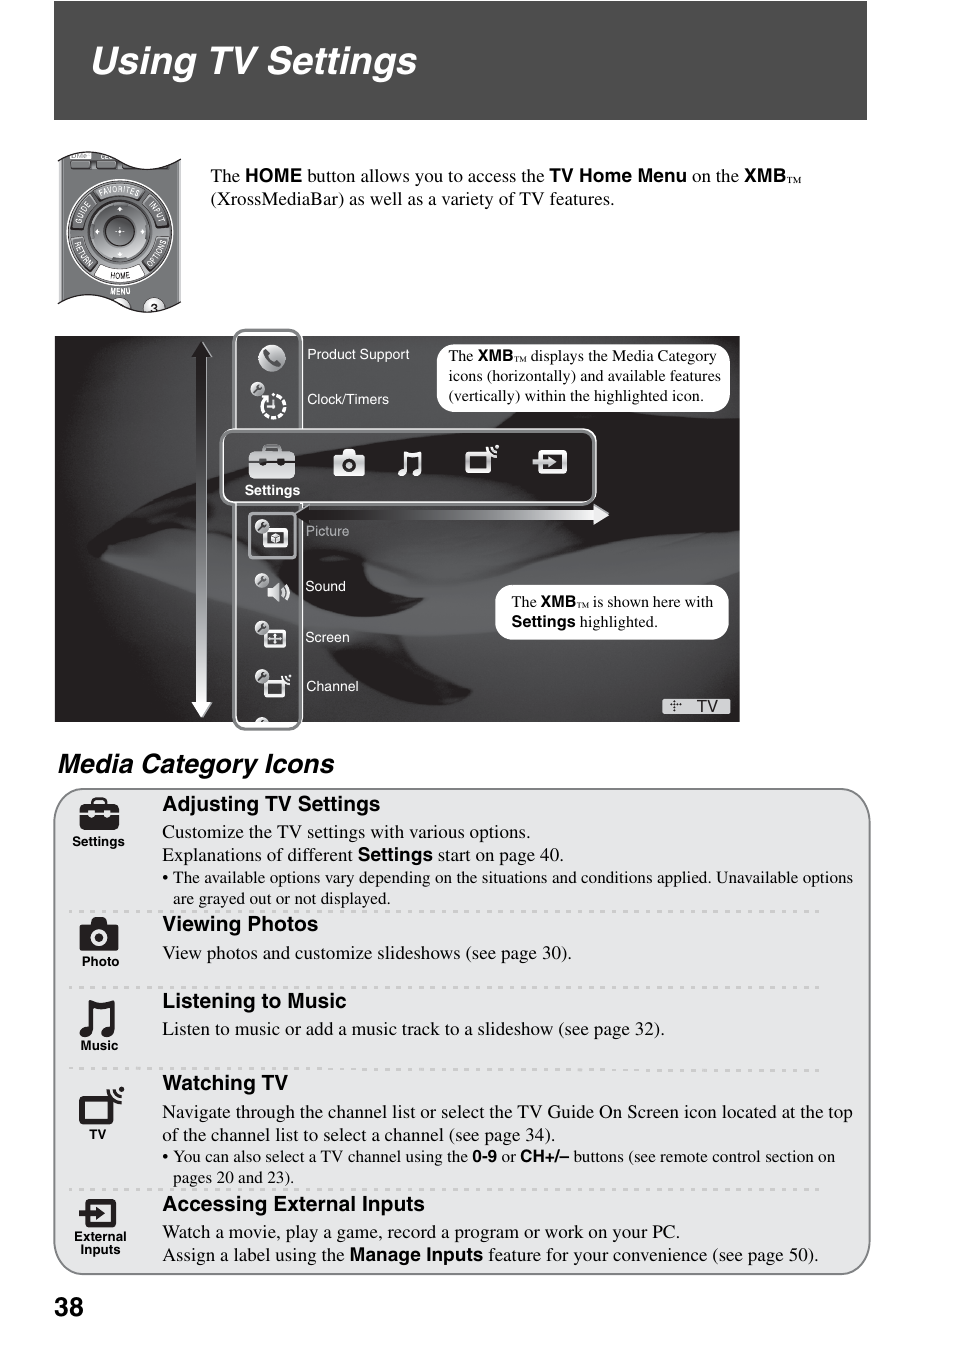 Using tv settings, Media category icons | Sony KDL-52XBR7 User Manual | Page 38 / 60